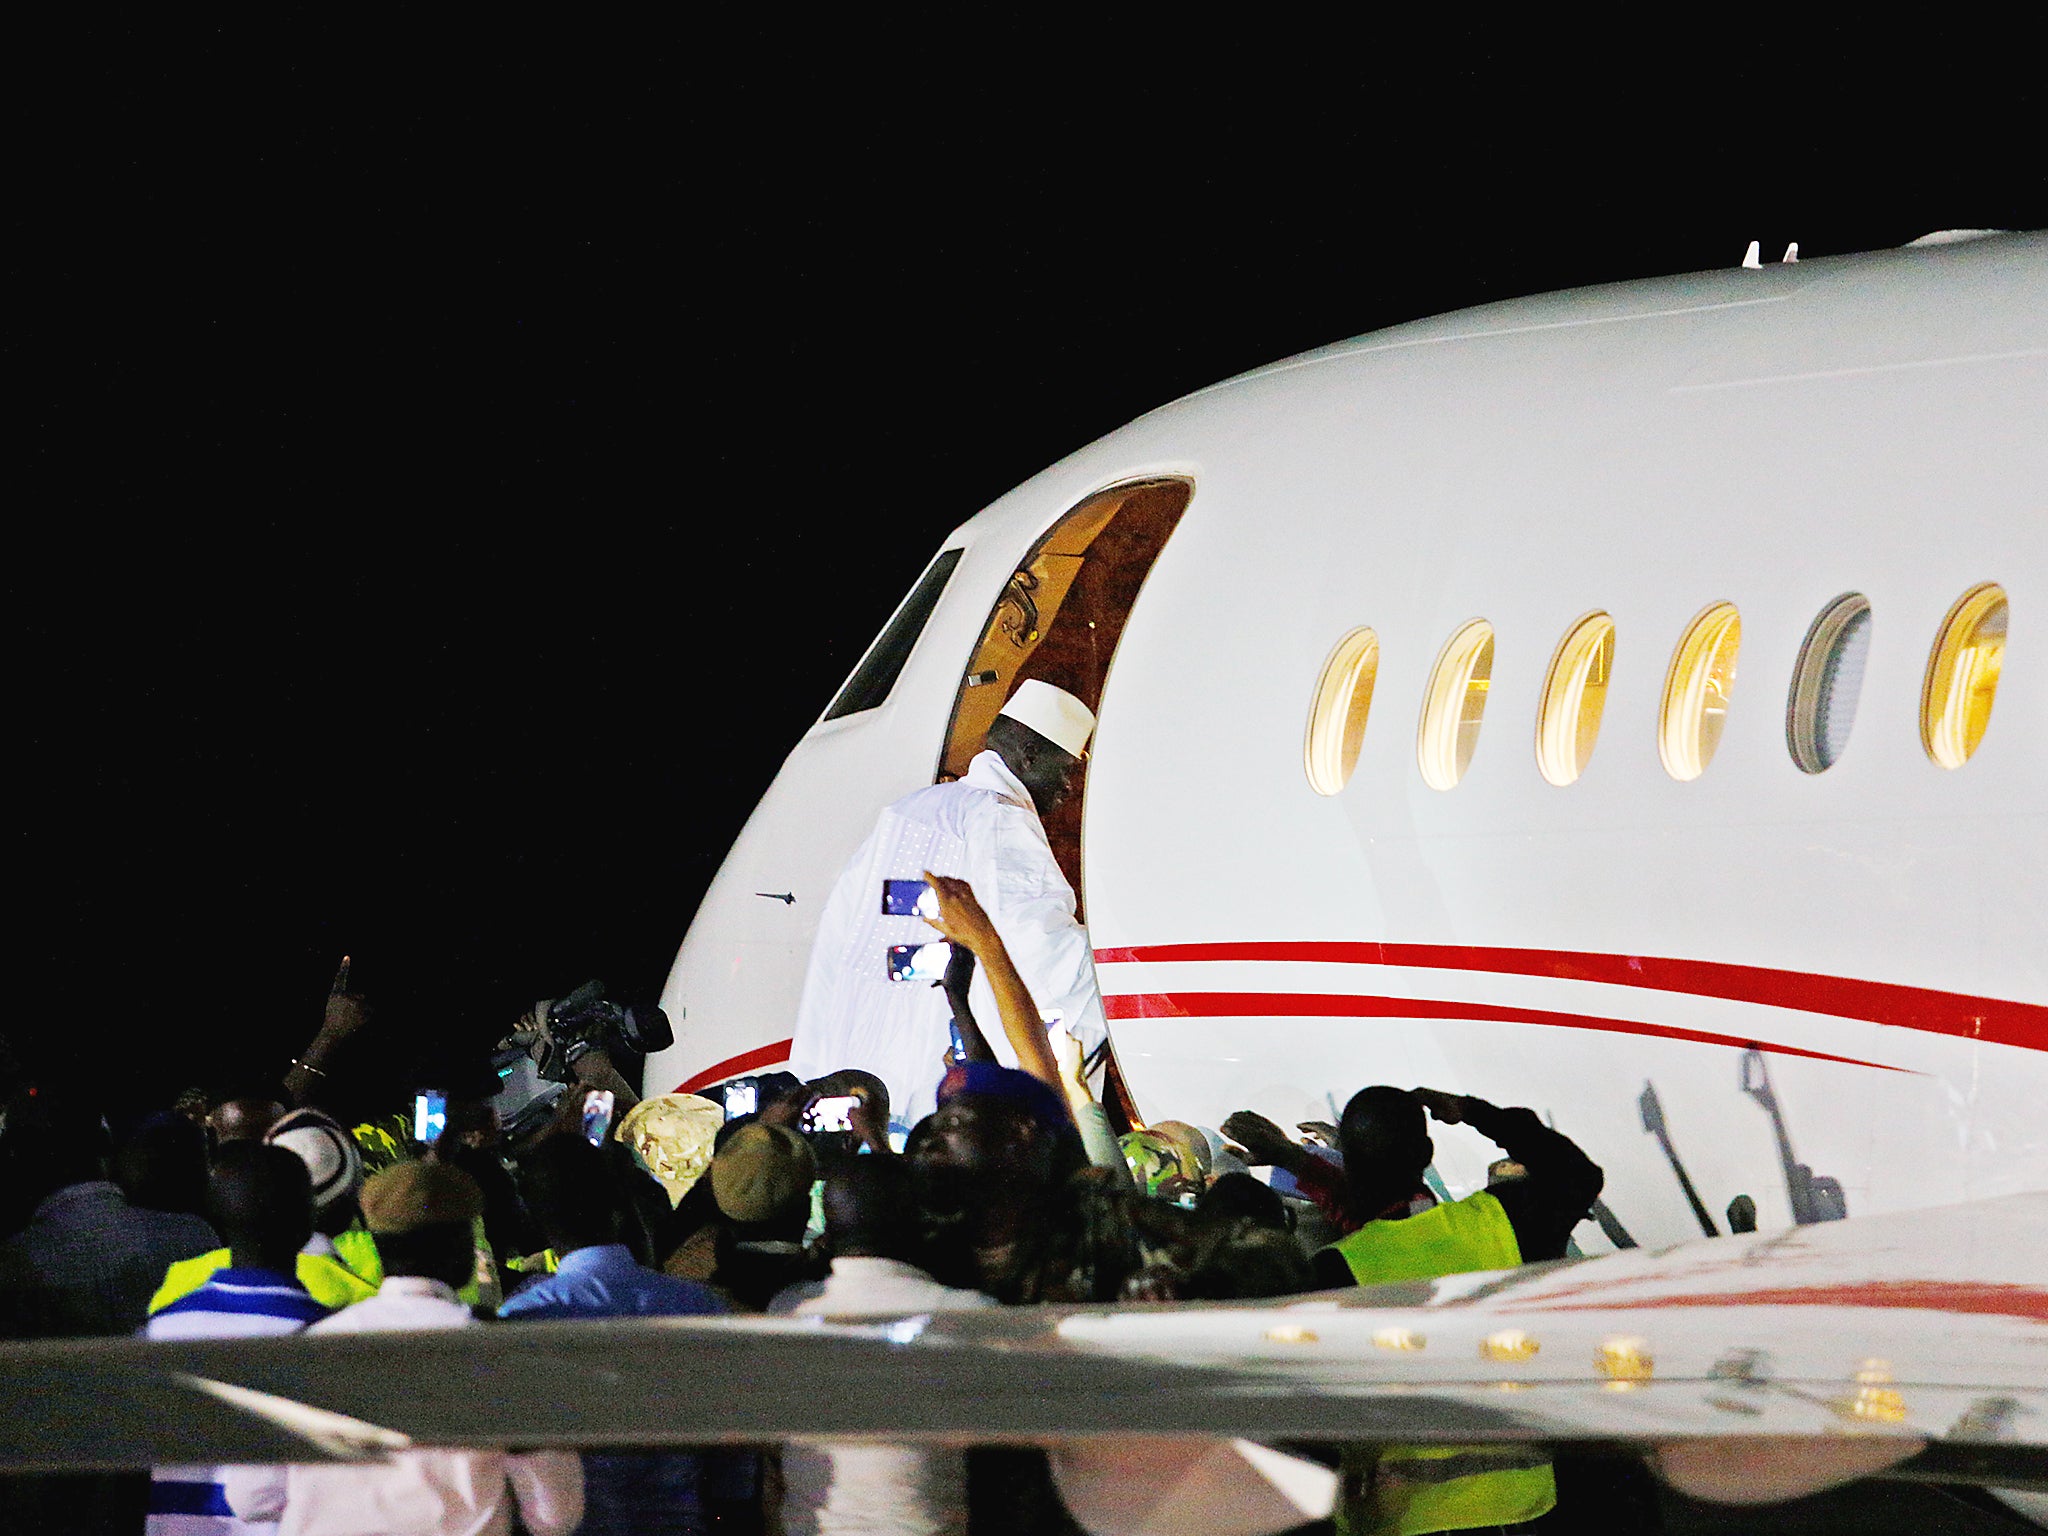 Former Gambian president Yahya Jammeh boards a private jet before departing Banjul airport, Gambia